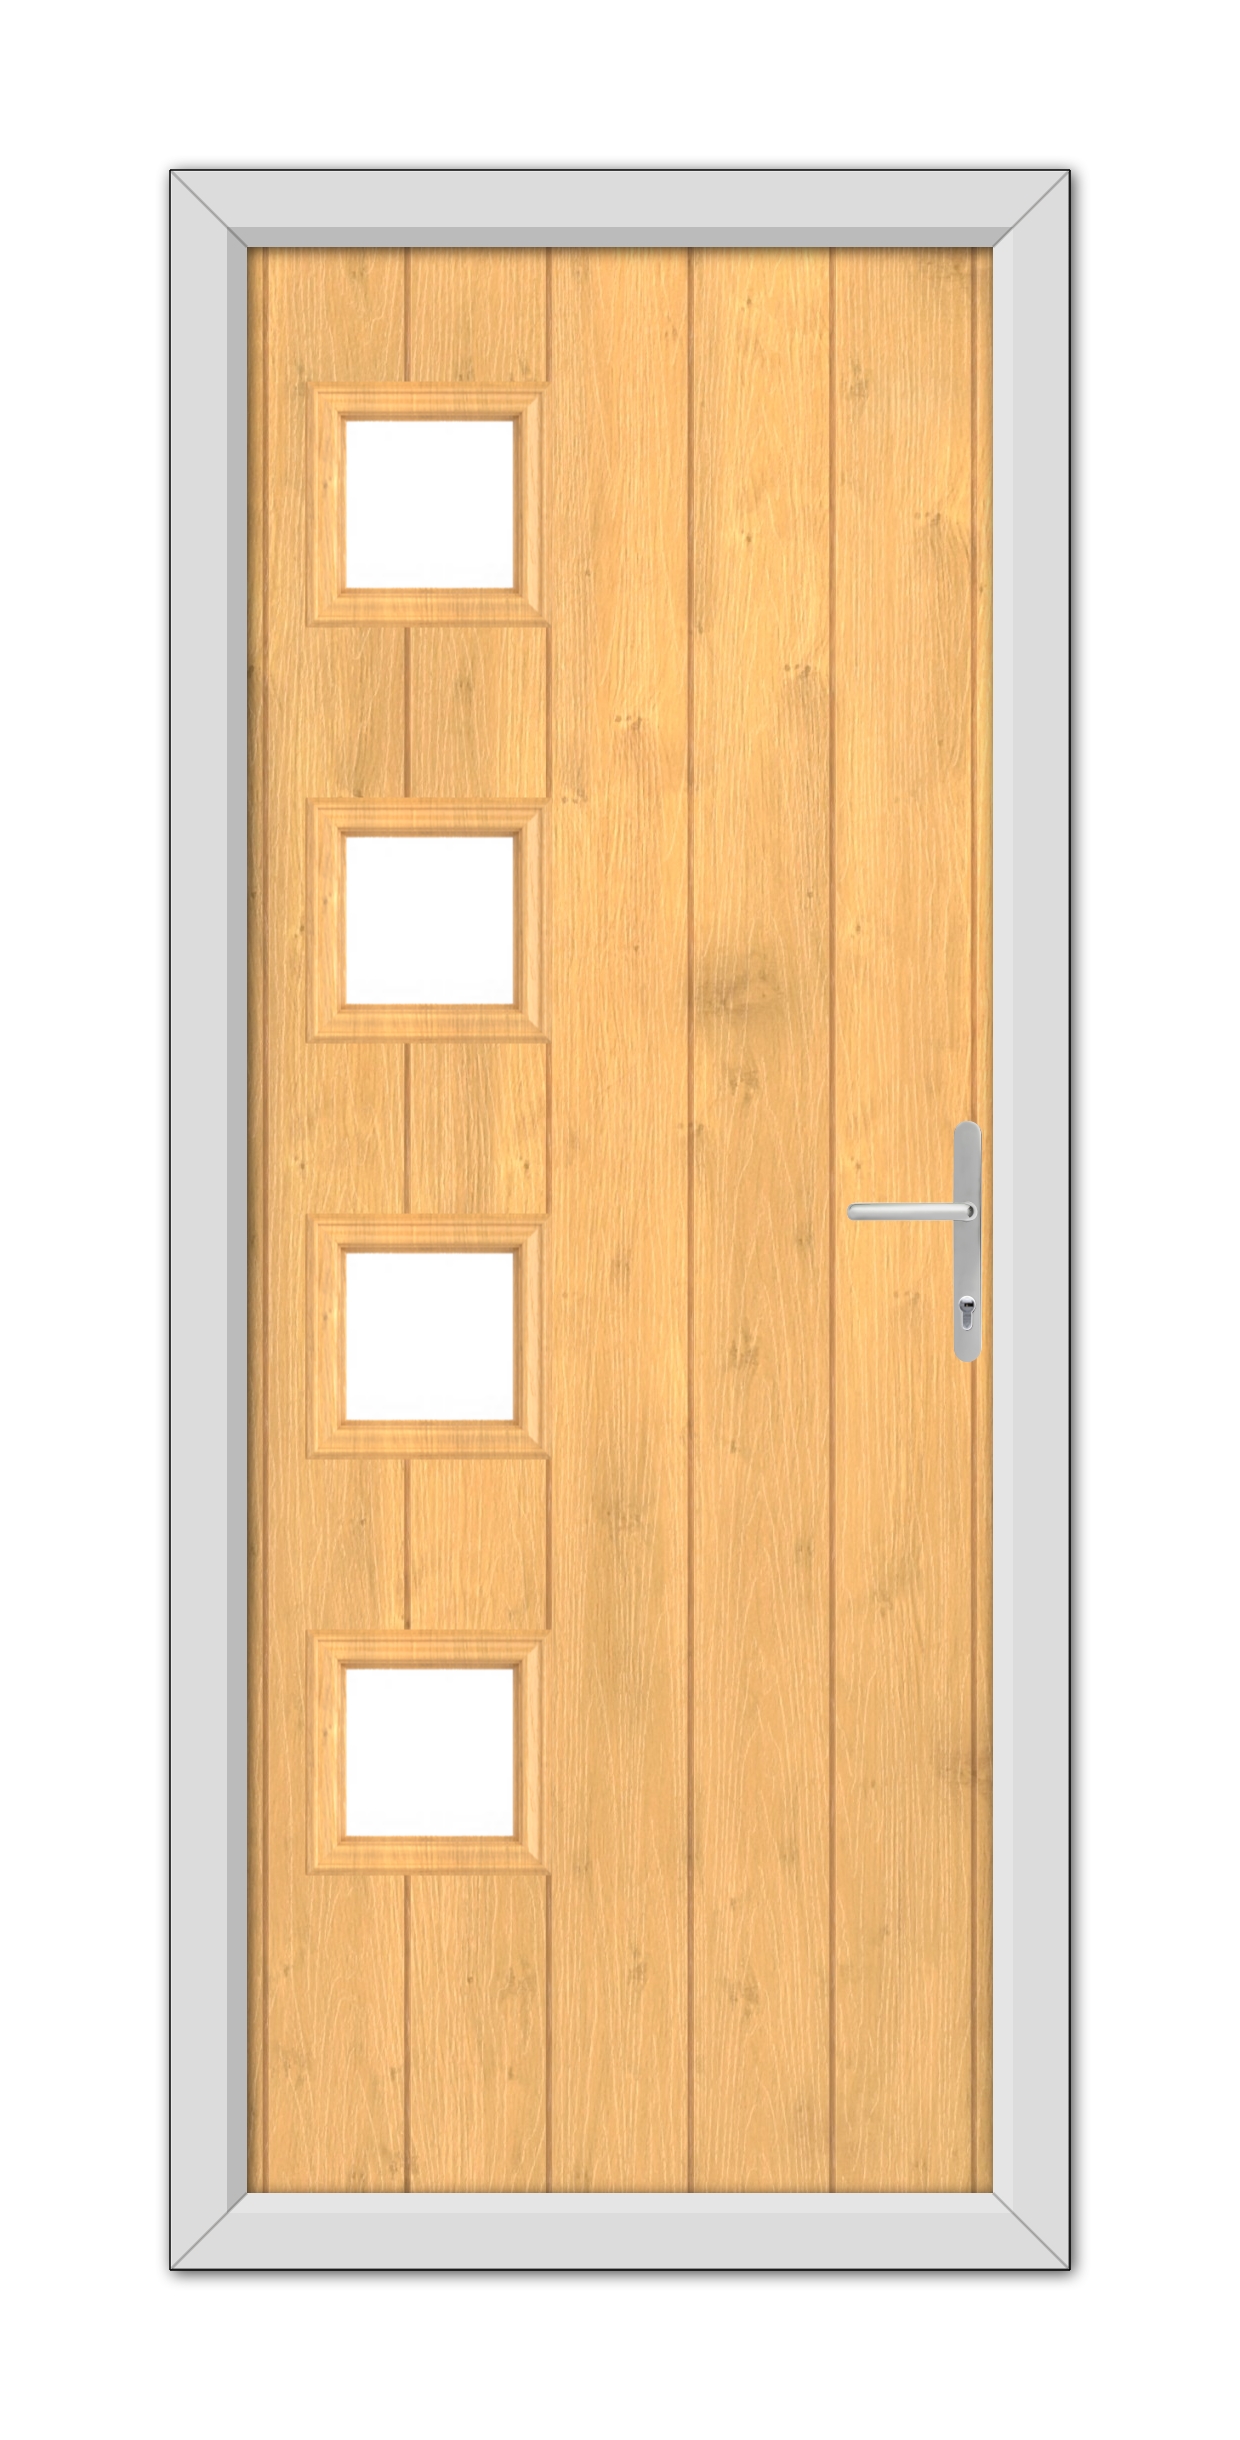 A modern Irish Oak Sussex Composite door with five horizontal glass panels and a metal handle, set within a gray frame, viewed from the front.